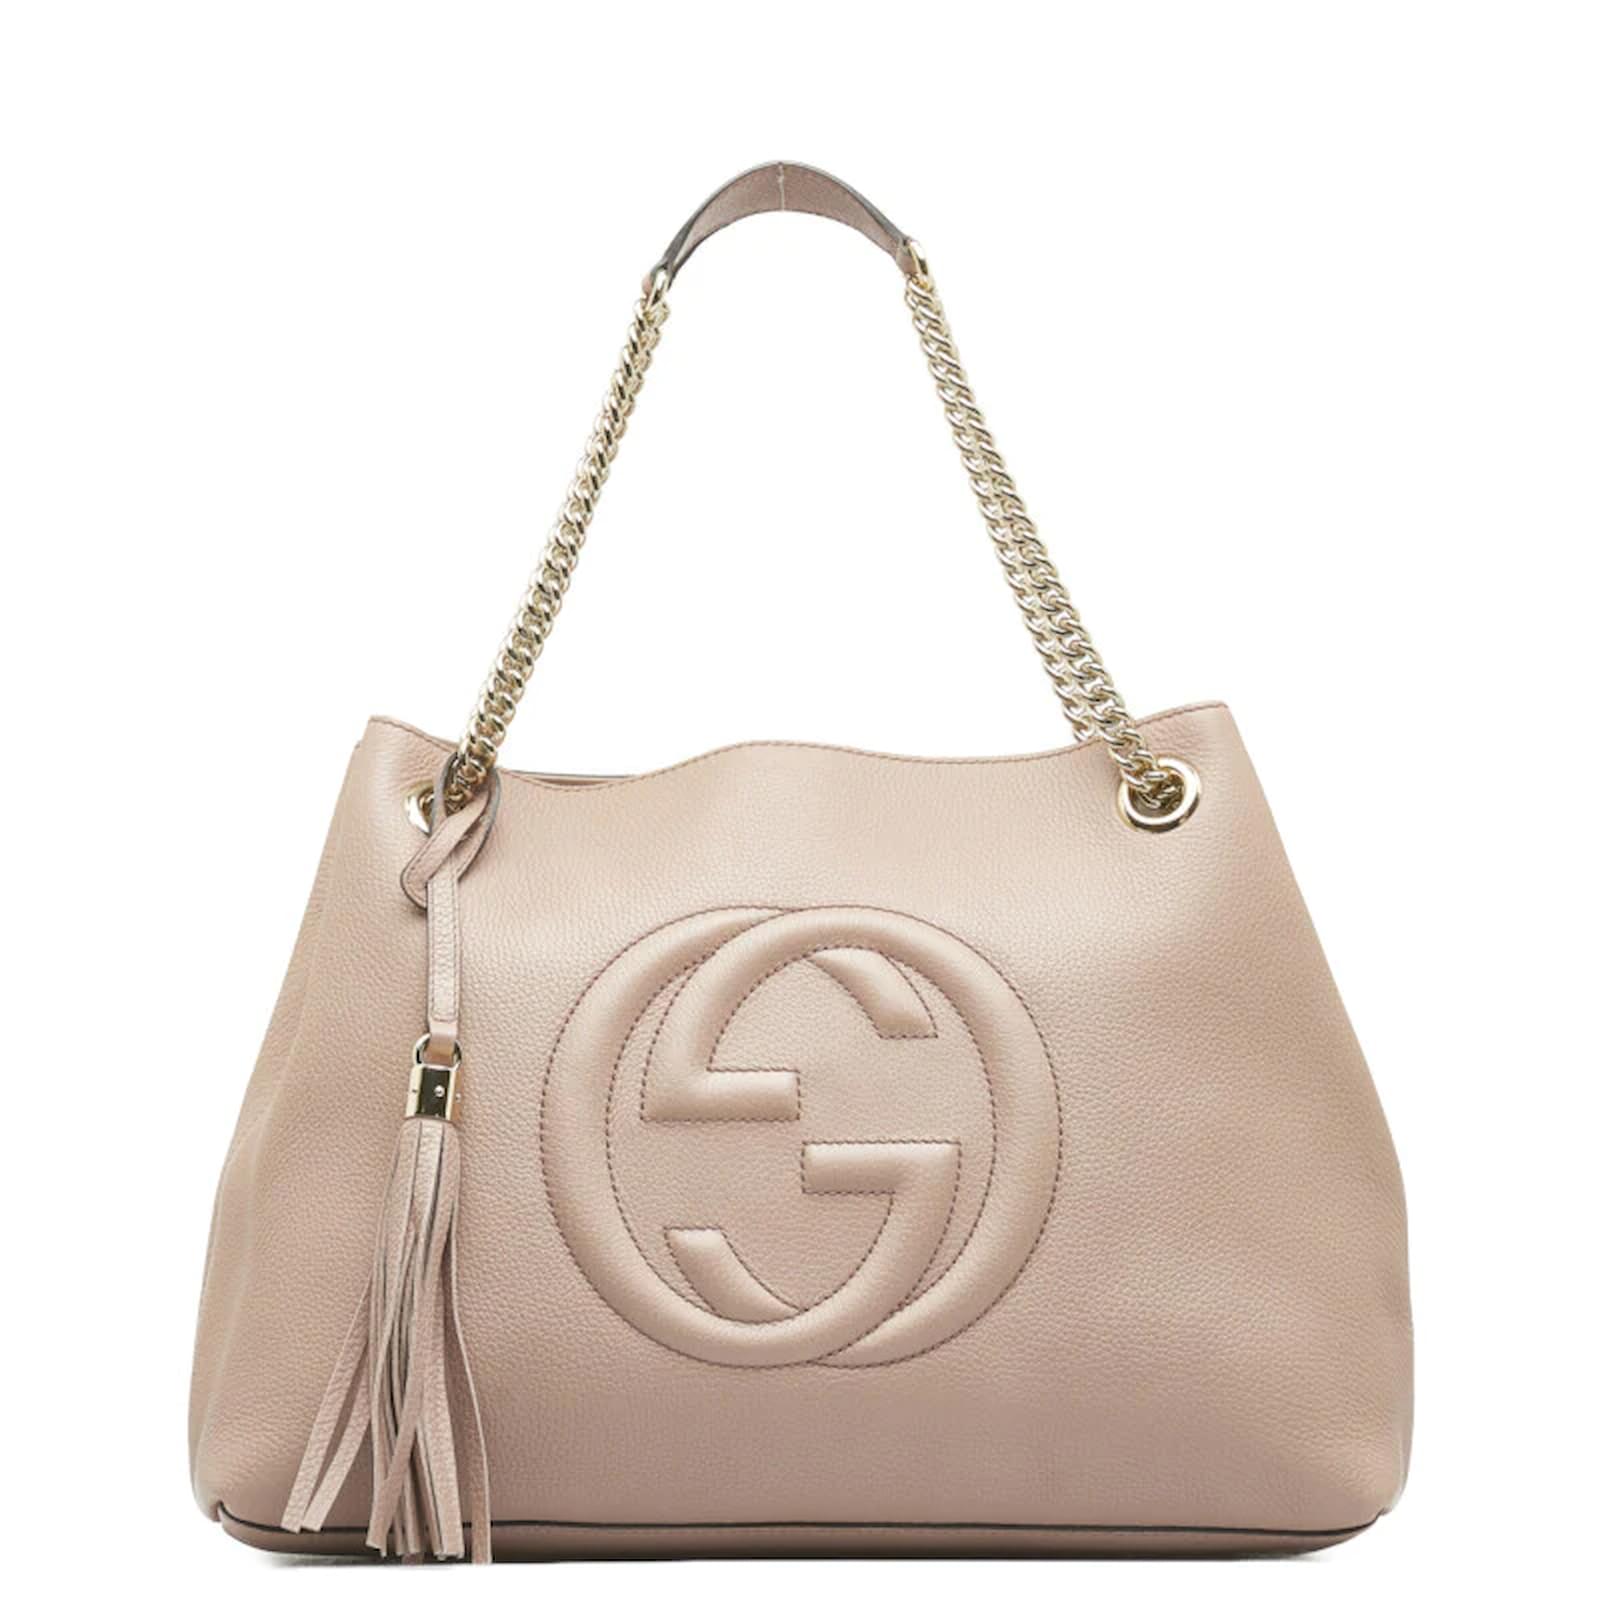 Gucci Soho Chain Shoulder Bag 308982 Pink Leather Pony-style